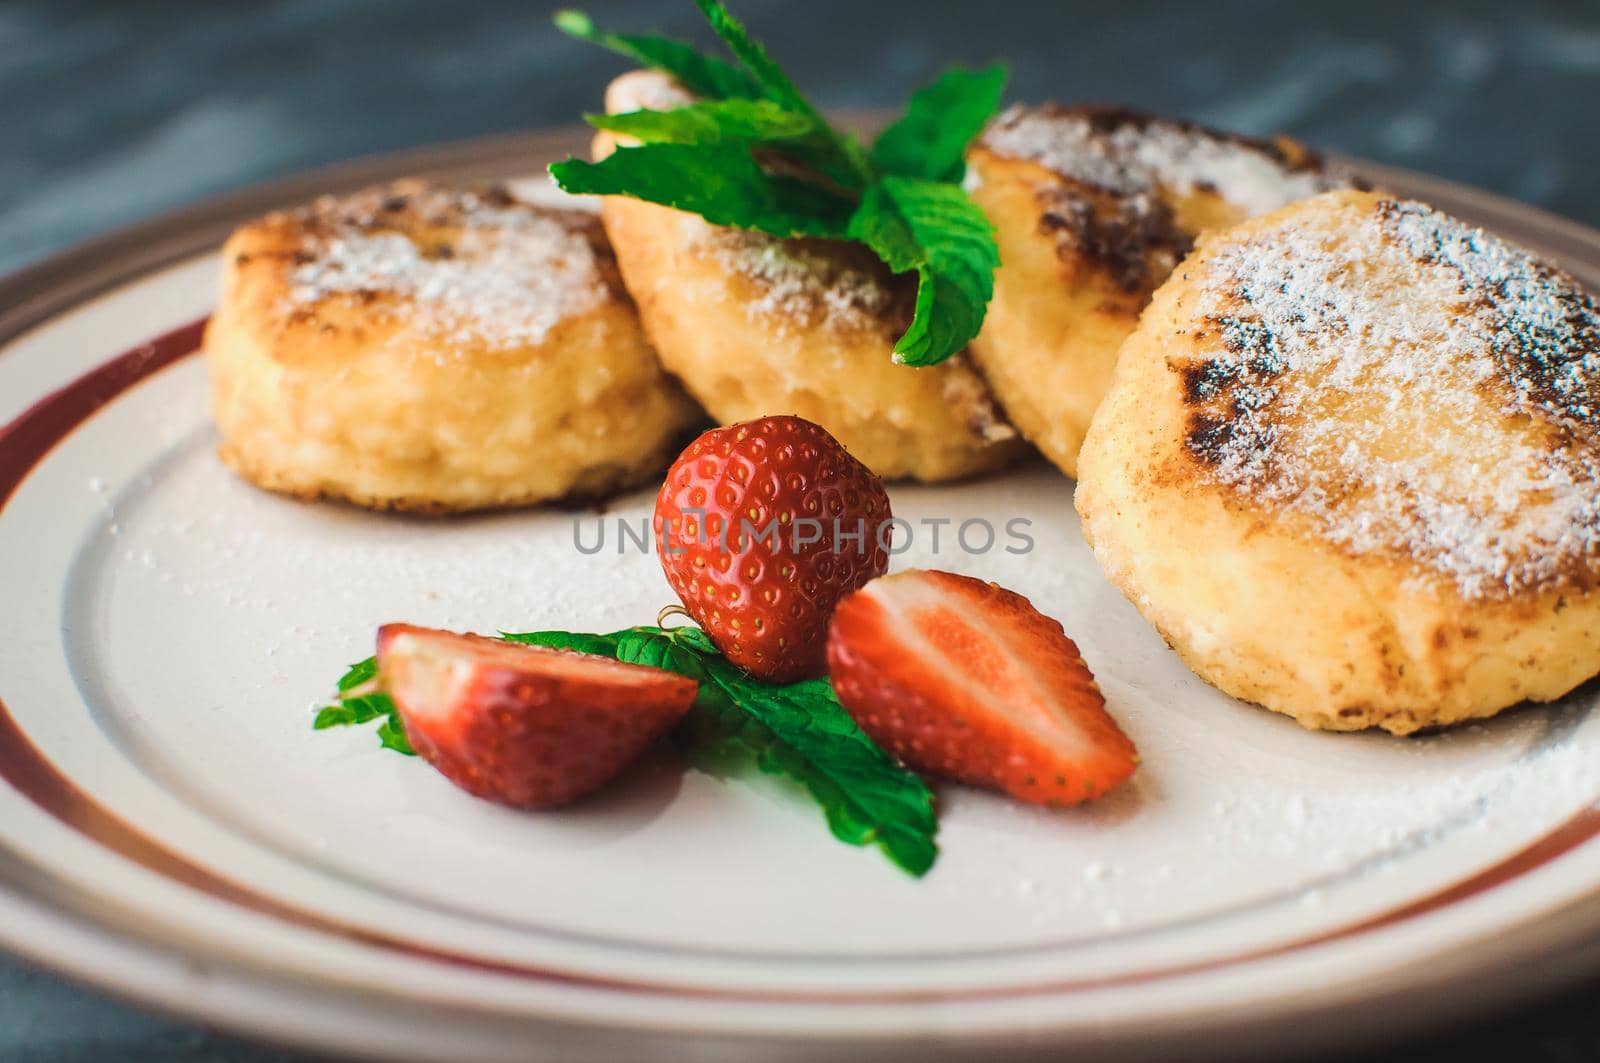 Gourmet breakfast - curd pancakes, cheesecakes, curd pancakes with strawberries, mint and icing sugar in a white plate. Selective focus.